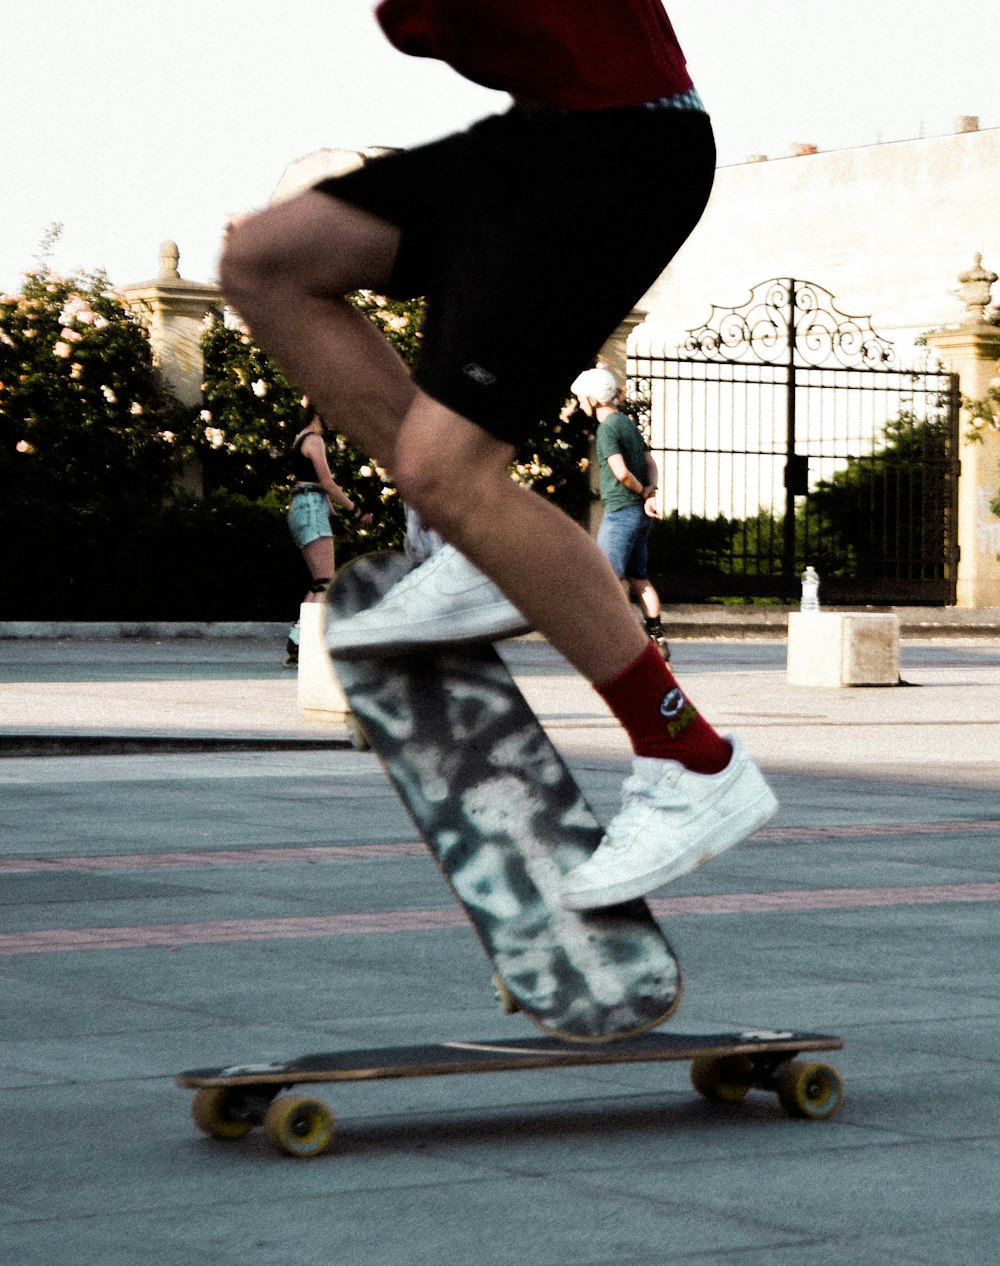 person in black shirt and white pants riding skateboard during daytime